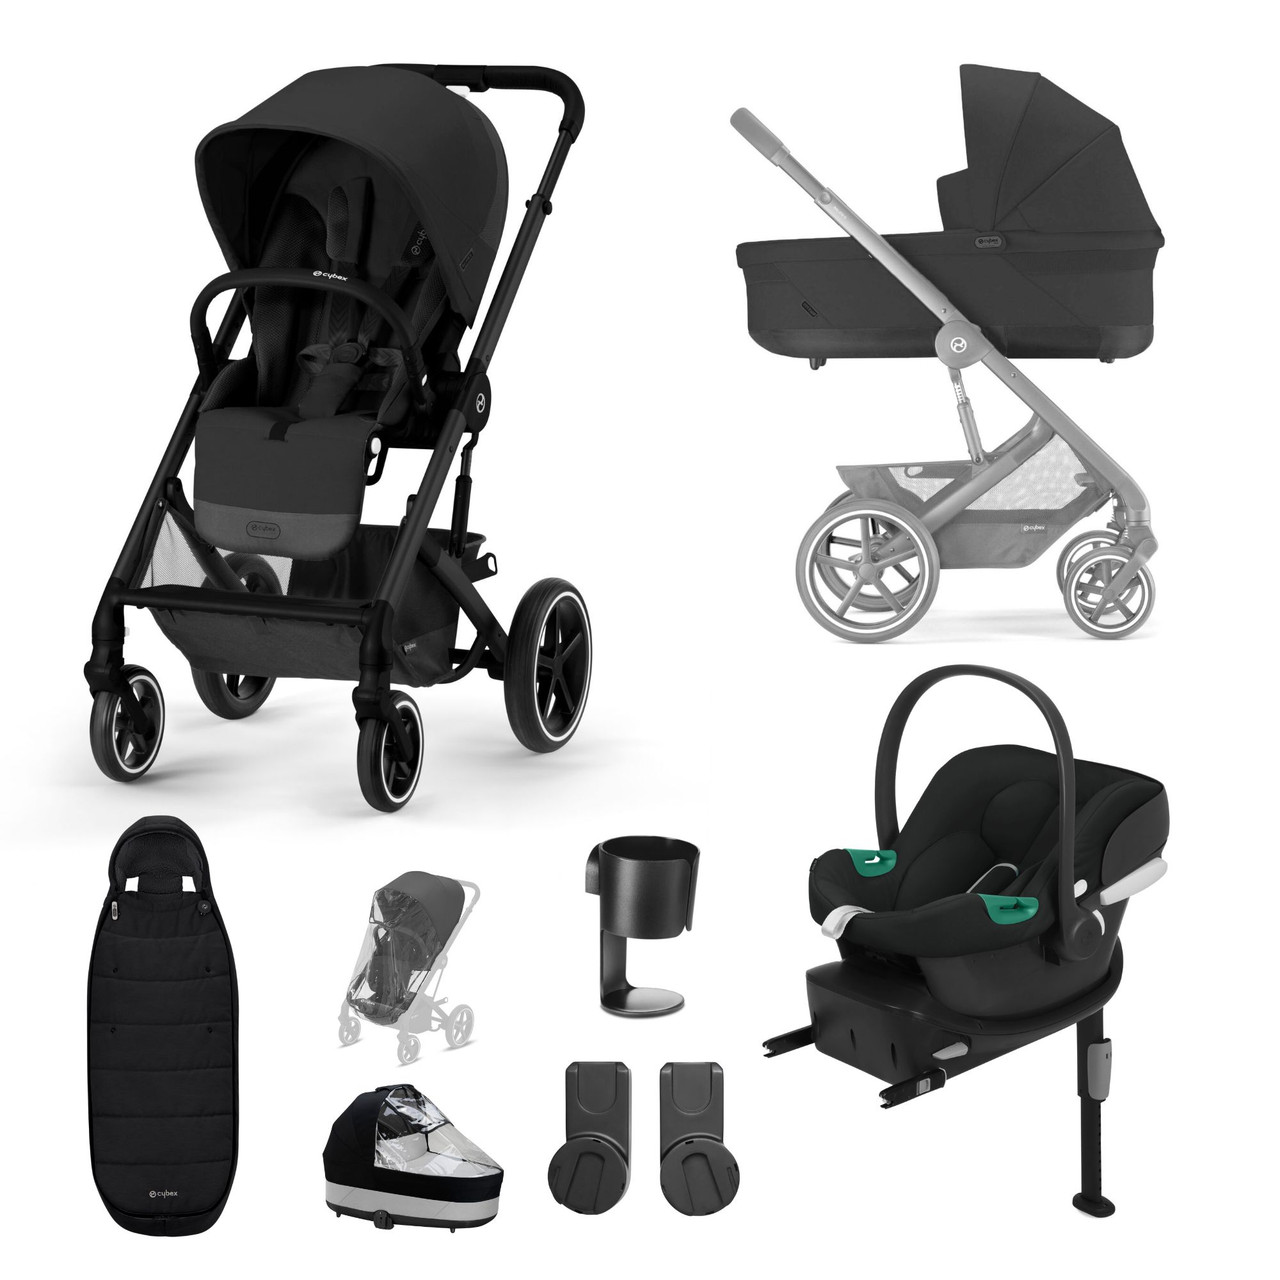 Cybex Balios S Lux 3-in-1 Travel System - Deep Black and Black